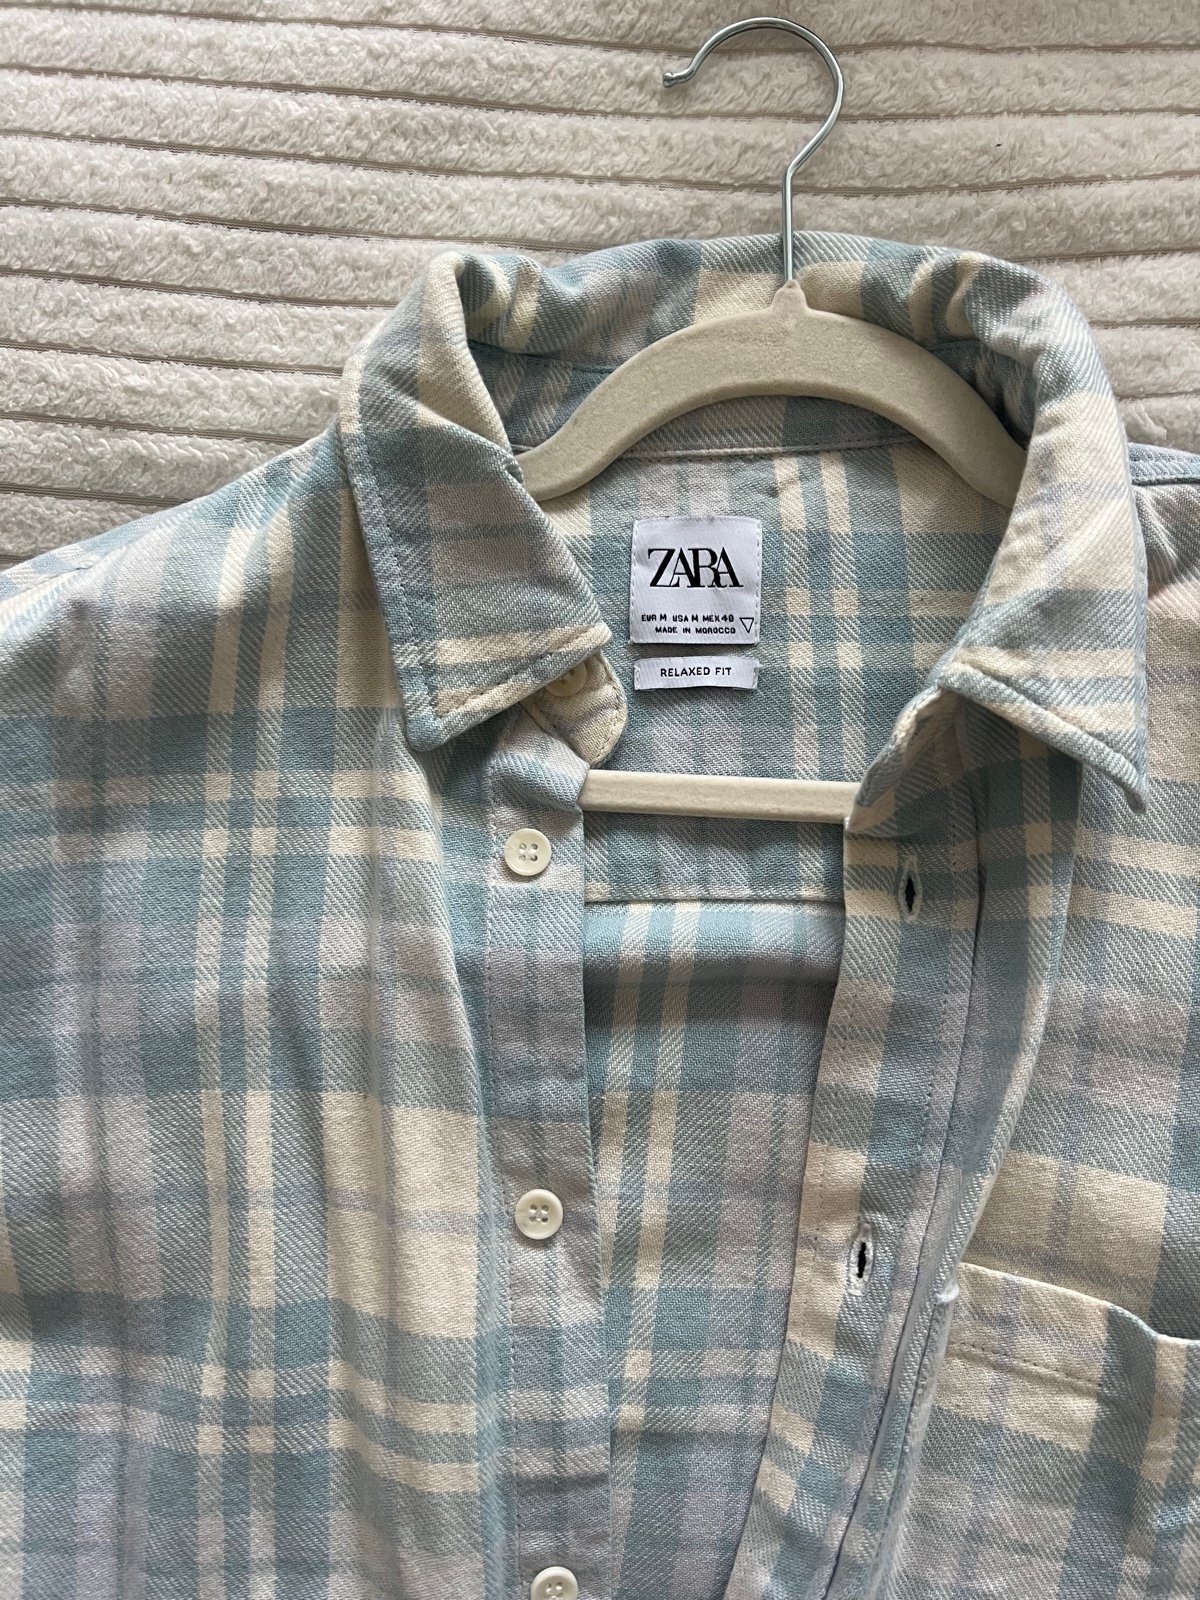 save up to 70% Oversized blue and white plaid shirt KMPBXOh9H on sale